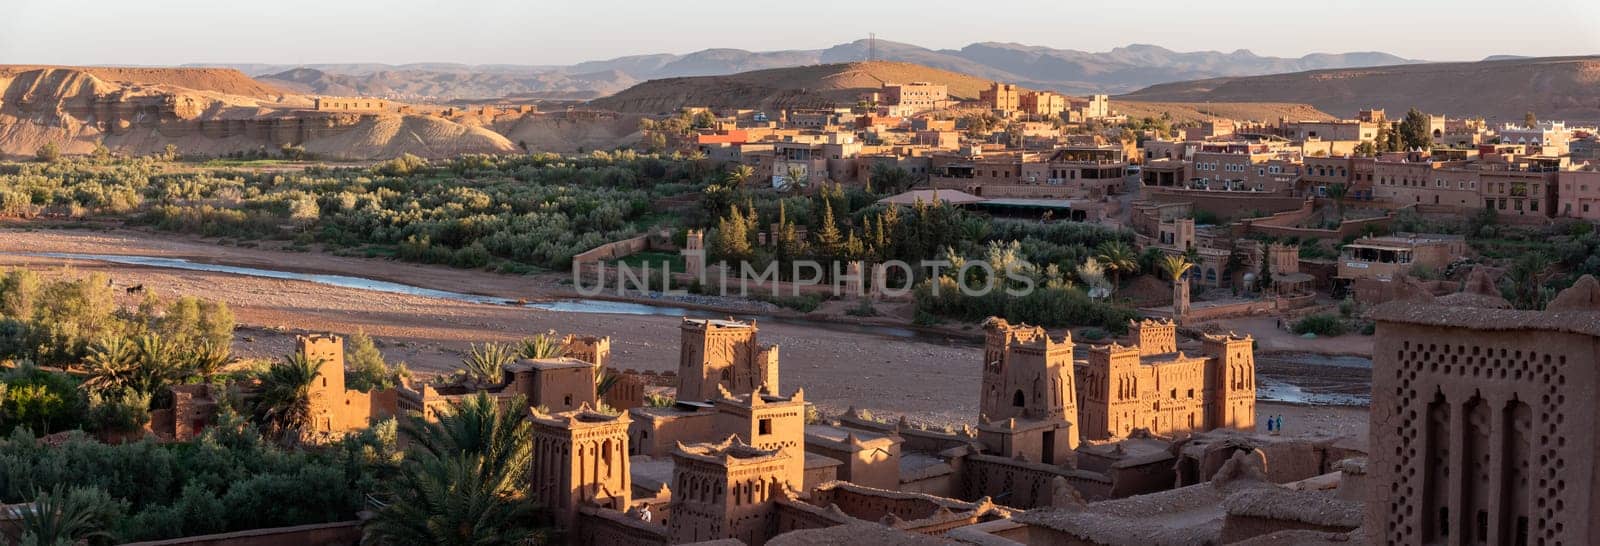 Sunset over the beautiful historic town Ait Ben Haddou in Morocco, famous berber town with many kasbahs built of clay, UNESCO world heritage